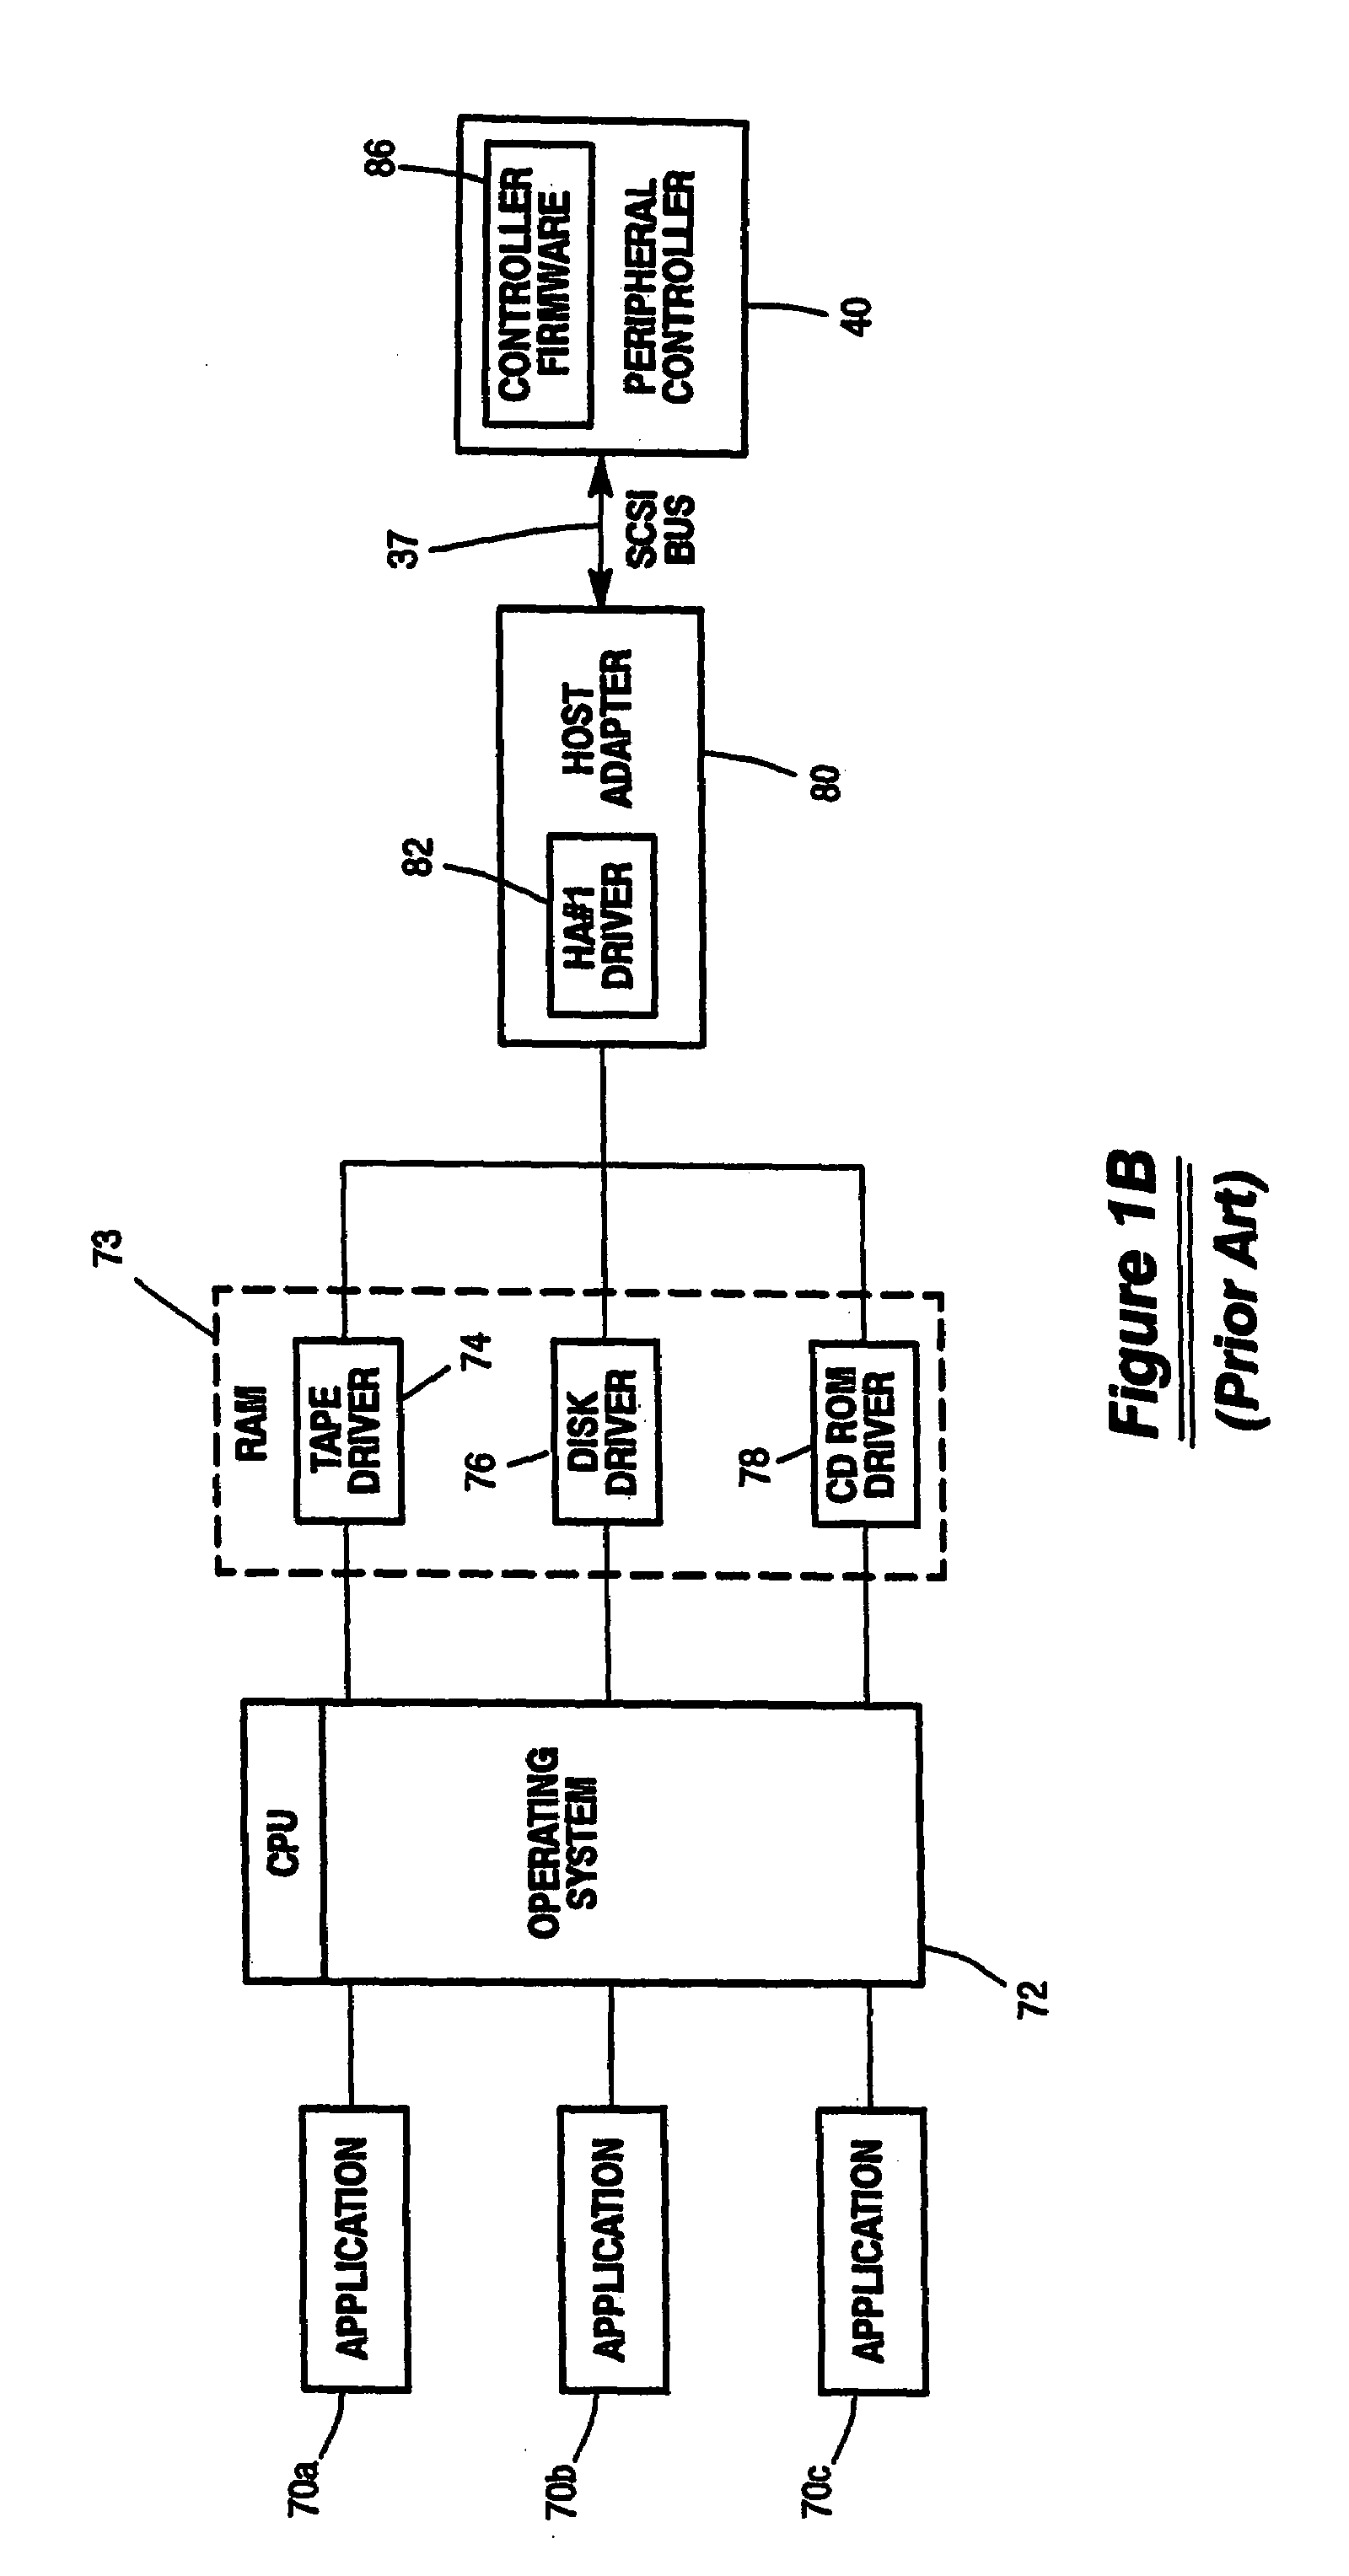 Method for efficiently downloading SCSI and SERVO firmware to SCSI target controllers